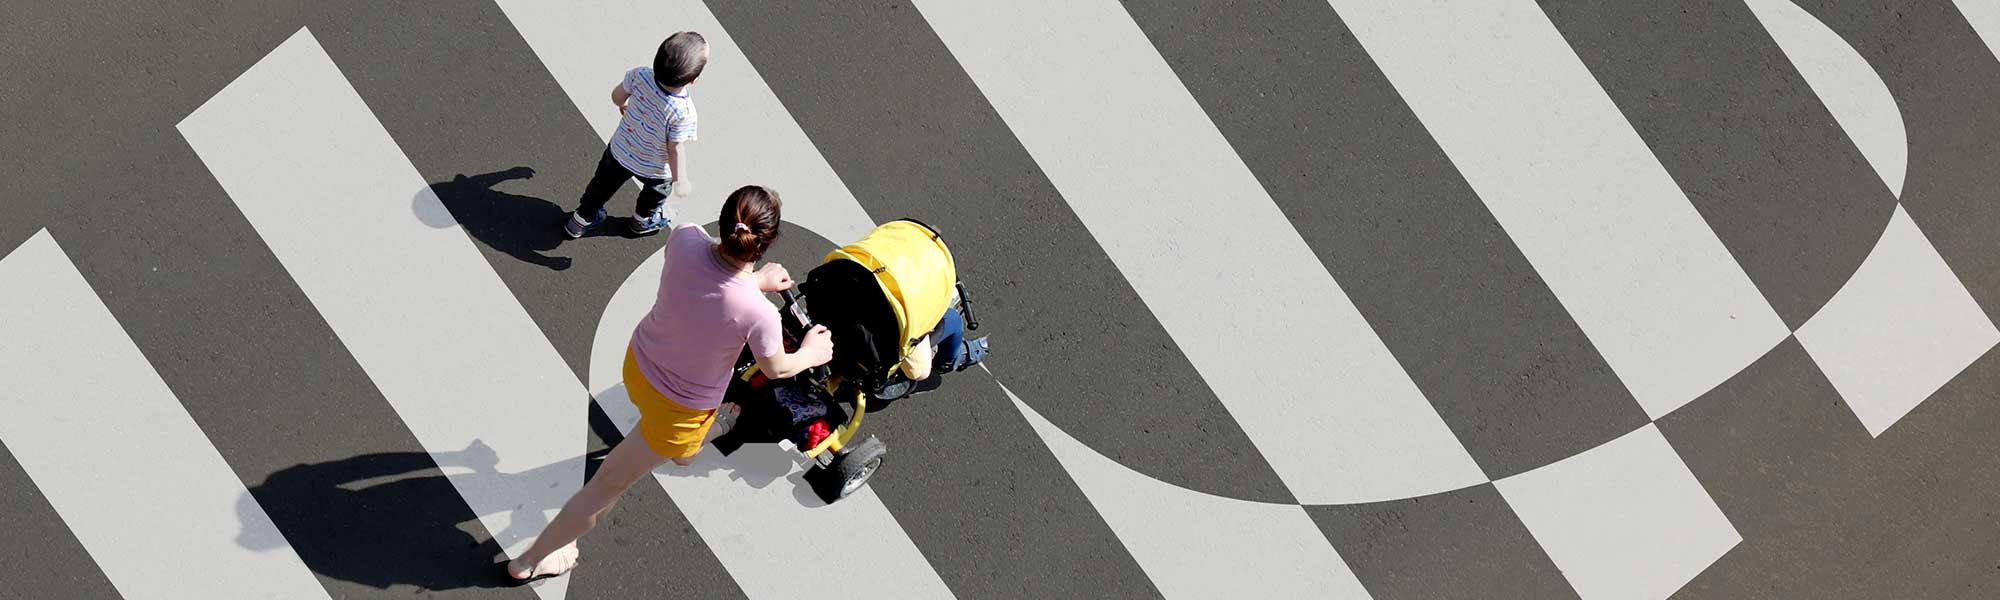 Birds eye view of a child and mother pushing a stroller crossing the street on a cross walk.